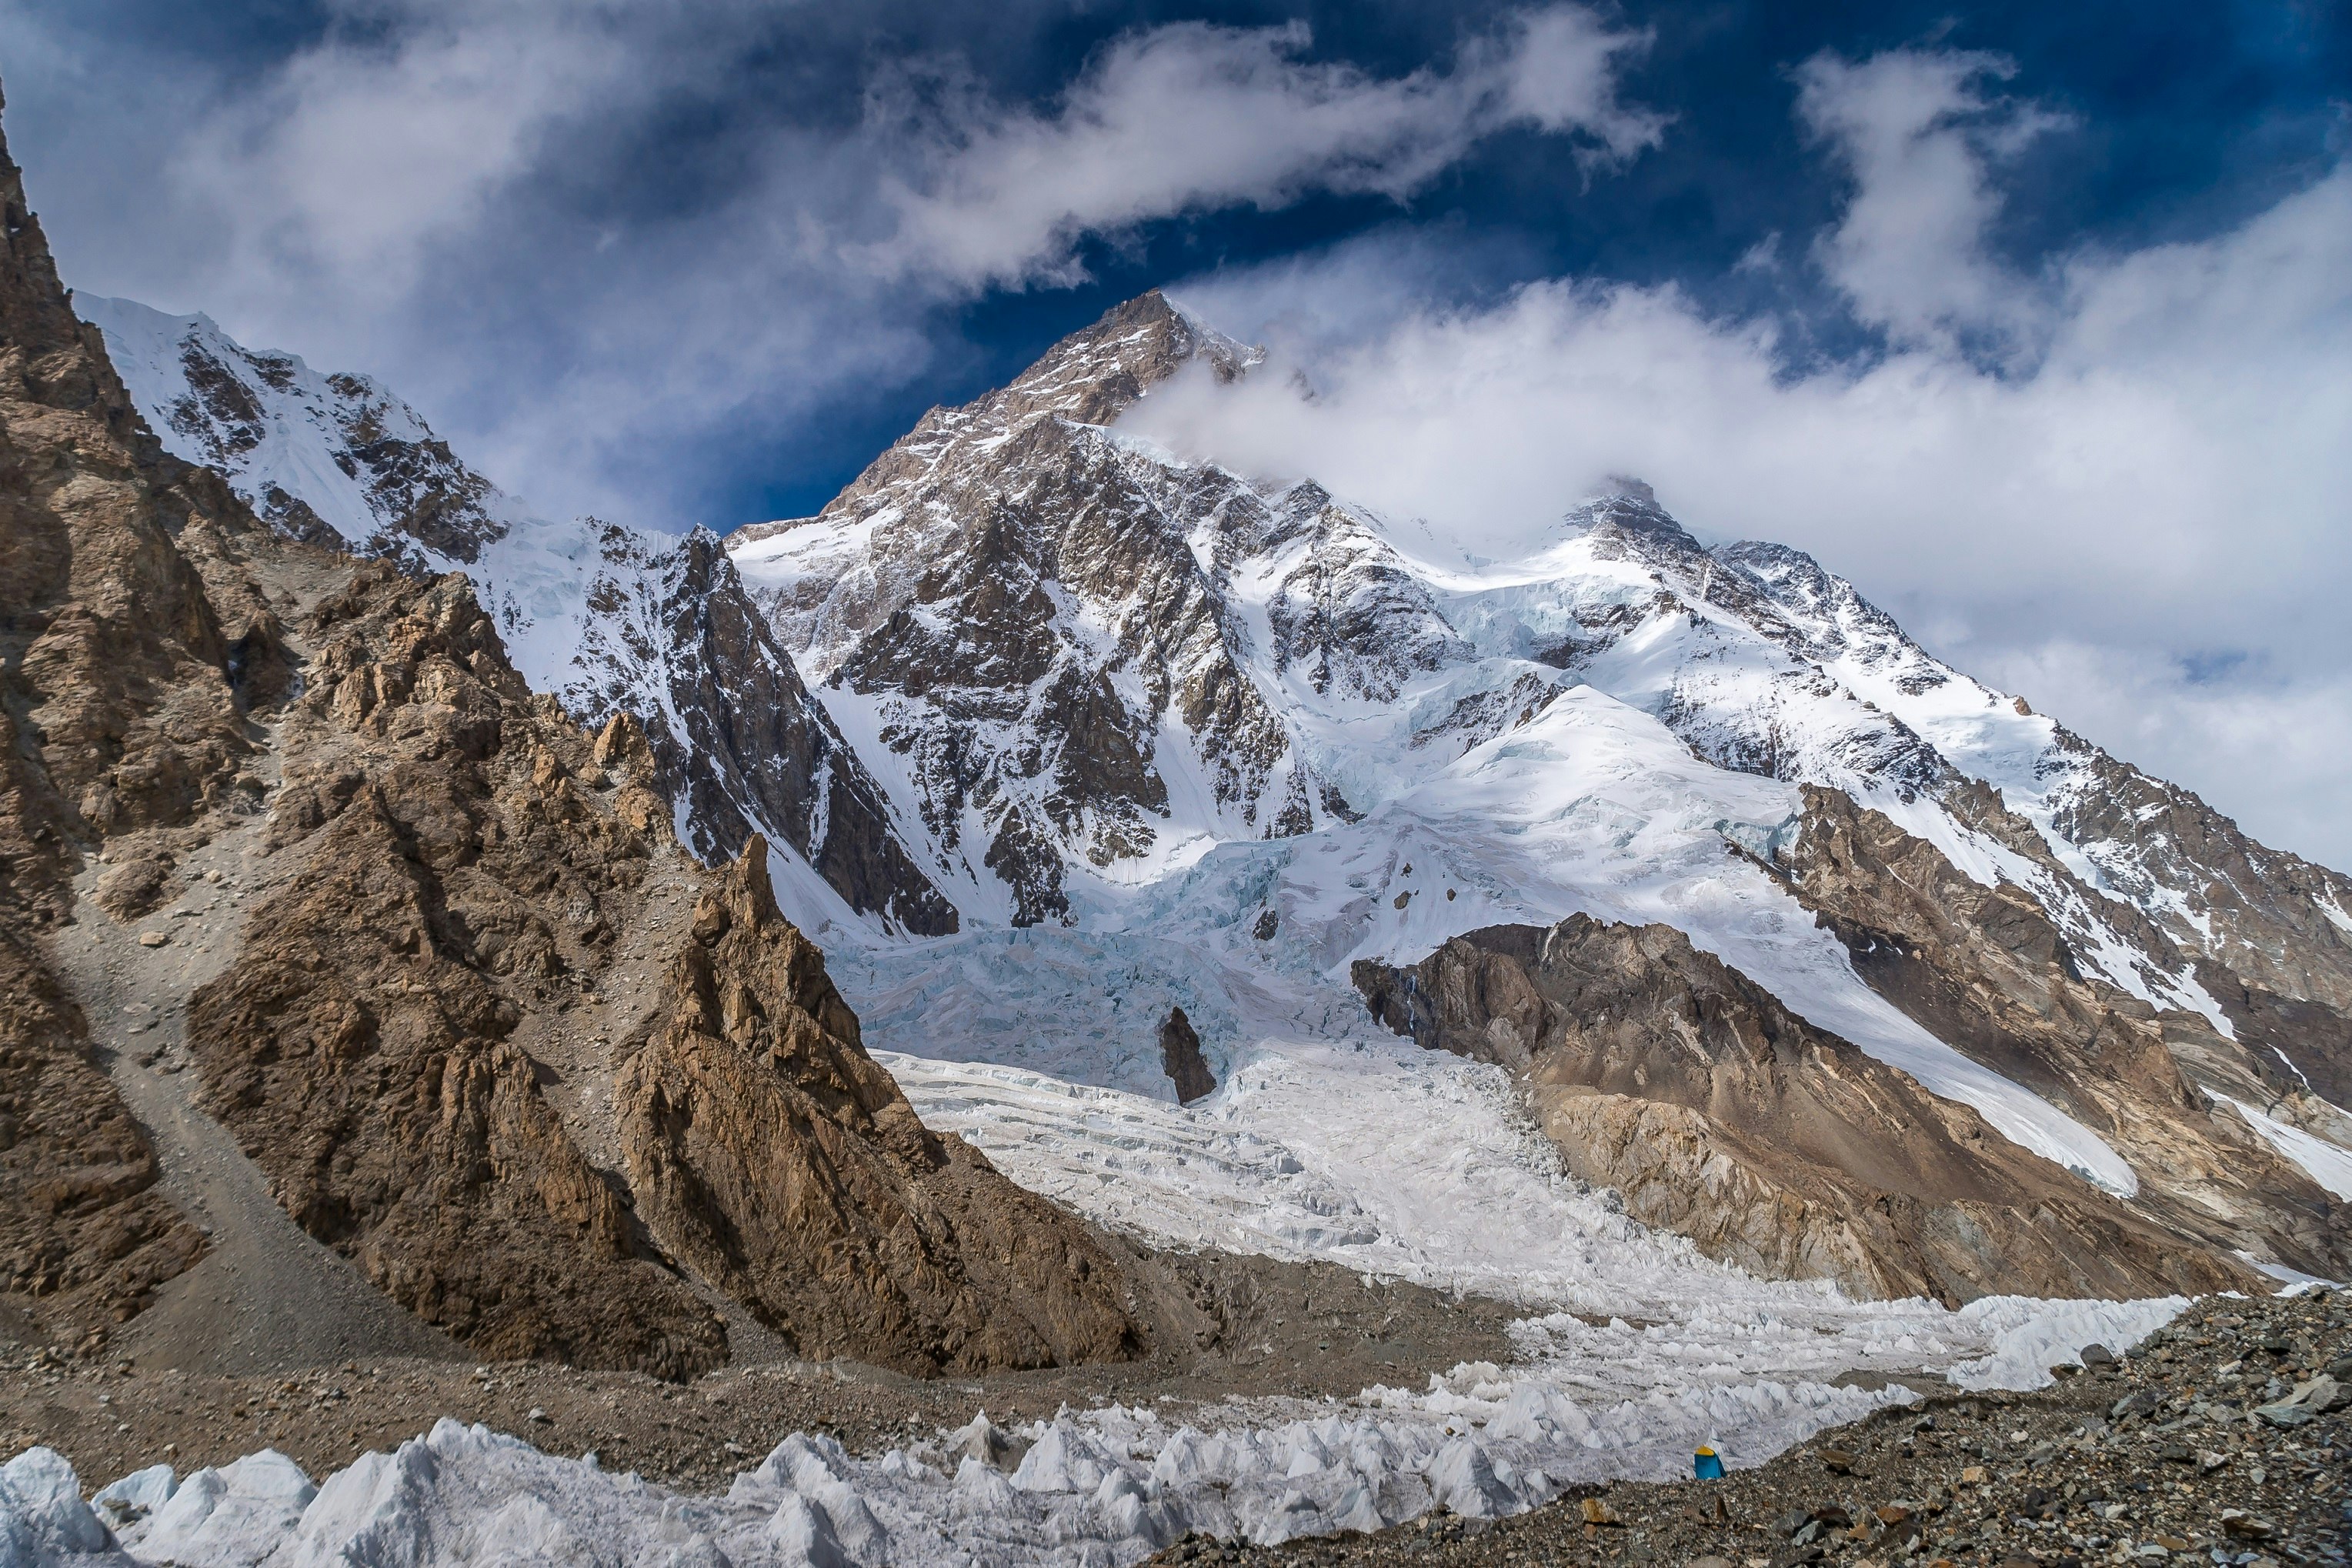 A view of K2 mountain from base camp. The rocky mountain is covered in snow and its peak is obscured slightly by cloud.